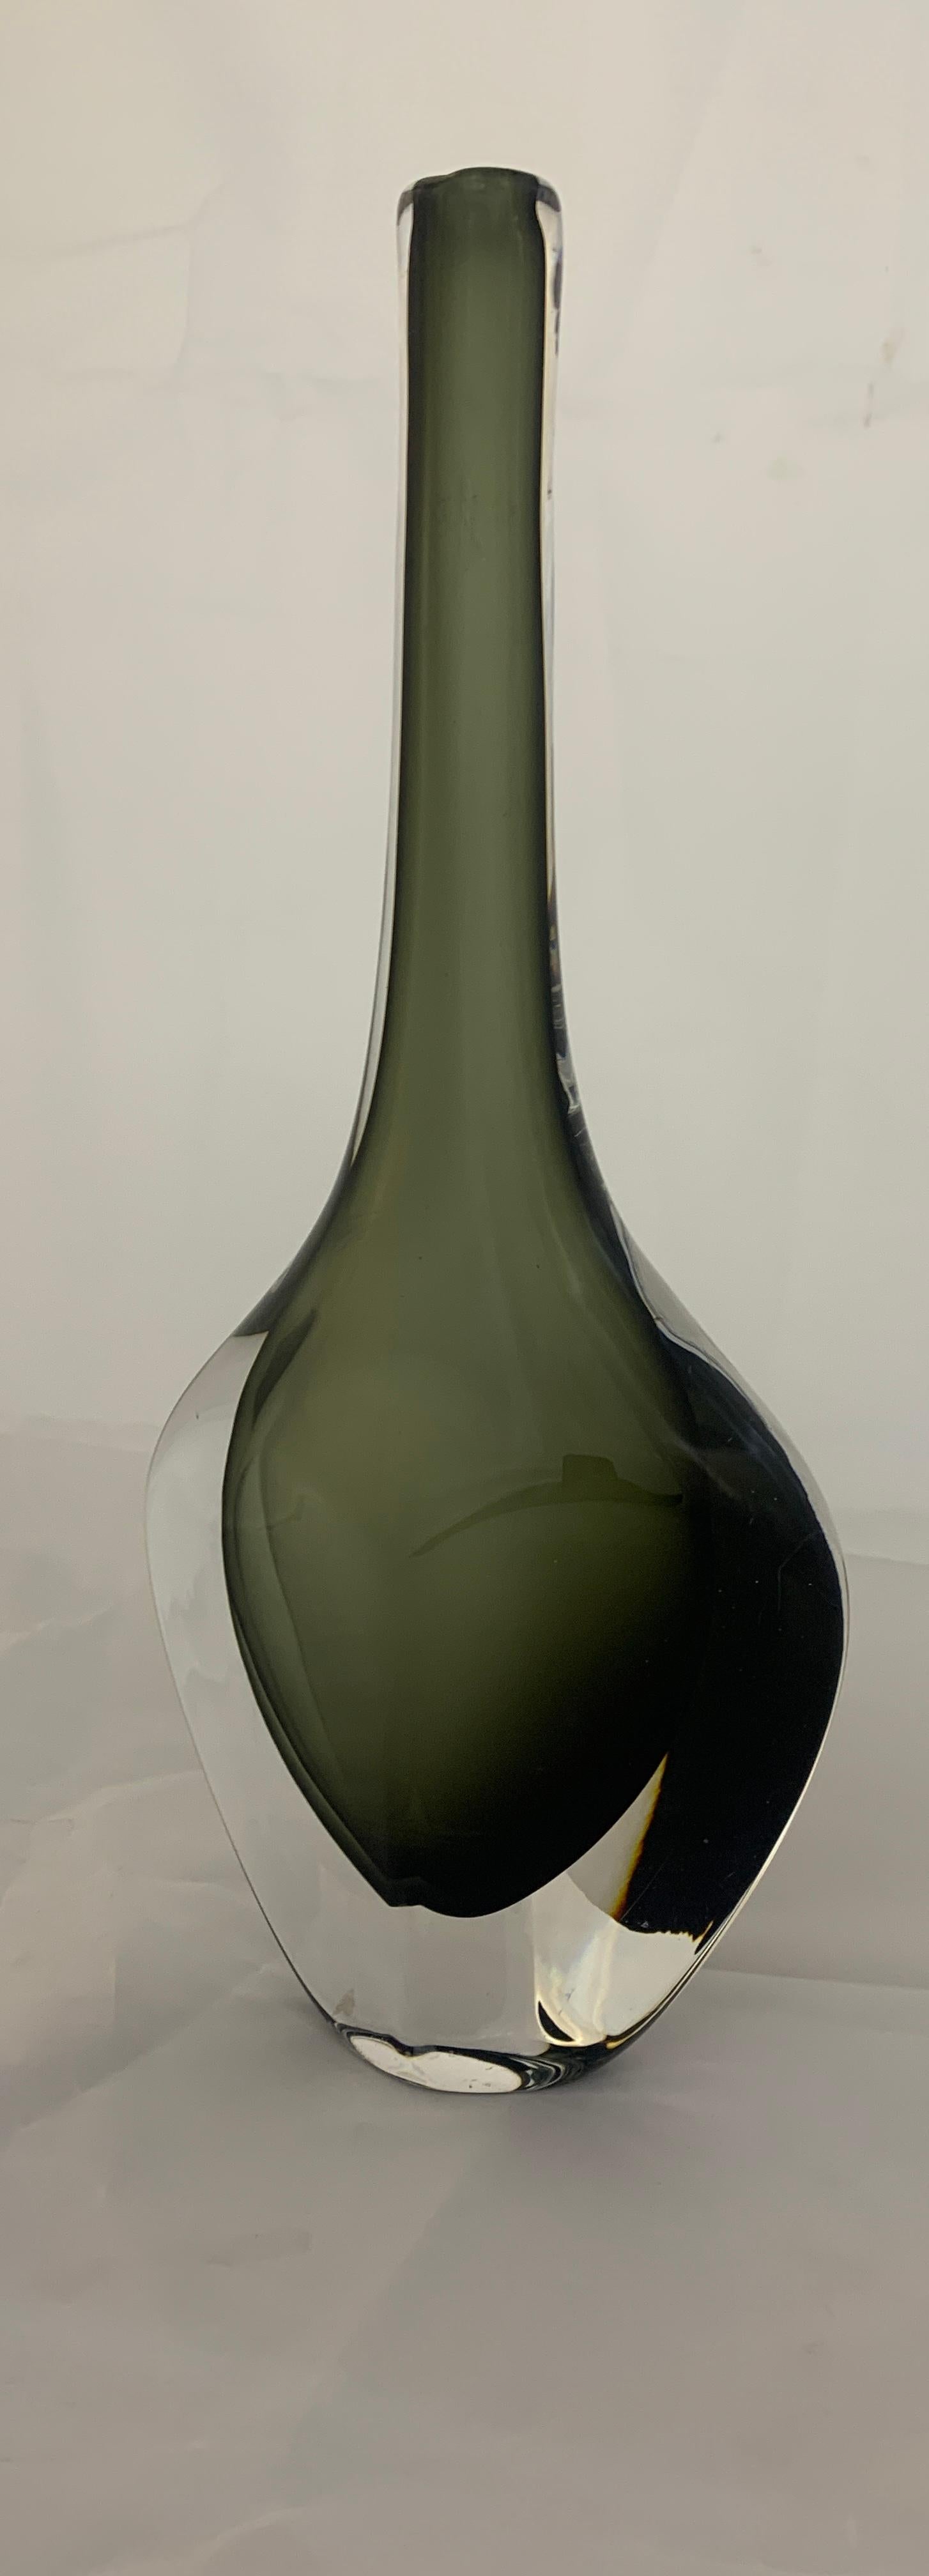 Orrefors glass vase, Dusk series, dark green color on white base. Designer Nils Landberg, vase production 1950-1959.
Signed and numbered on the base. In excellent state of preservation with small scratches. In the 20th century Orrefors would become